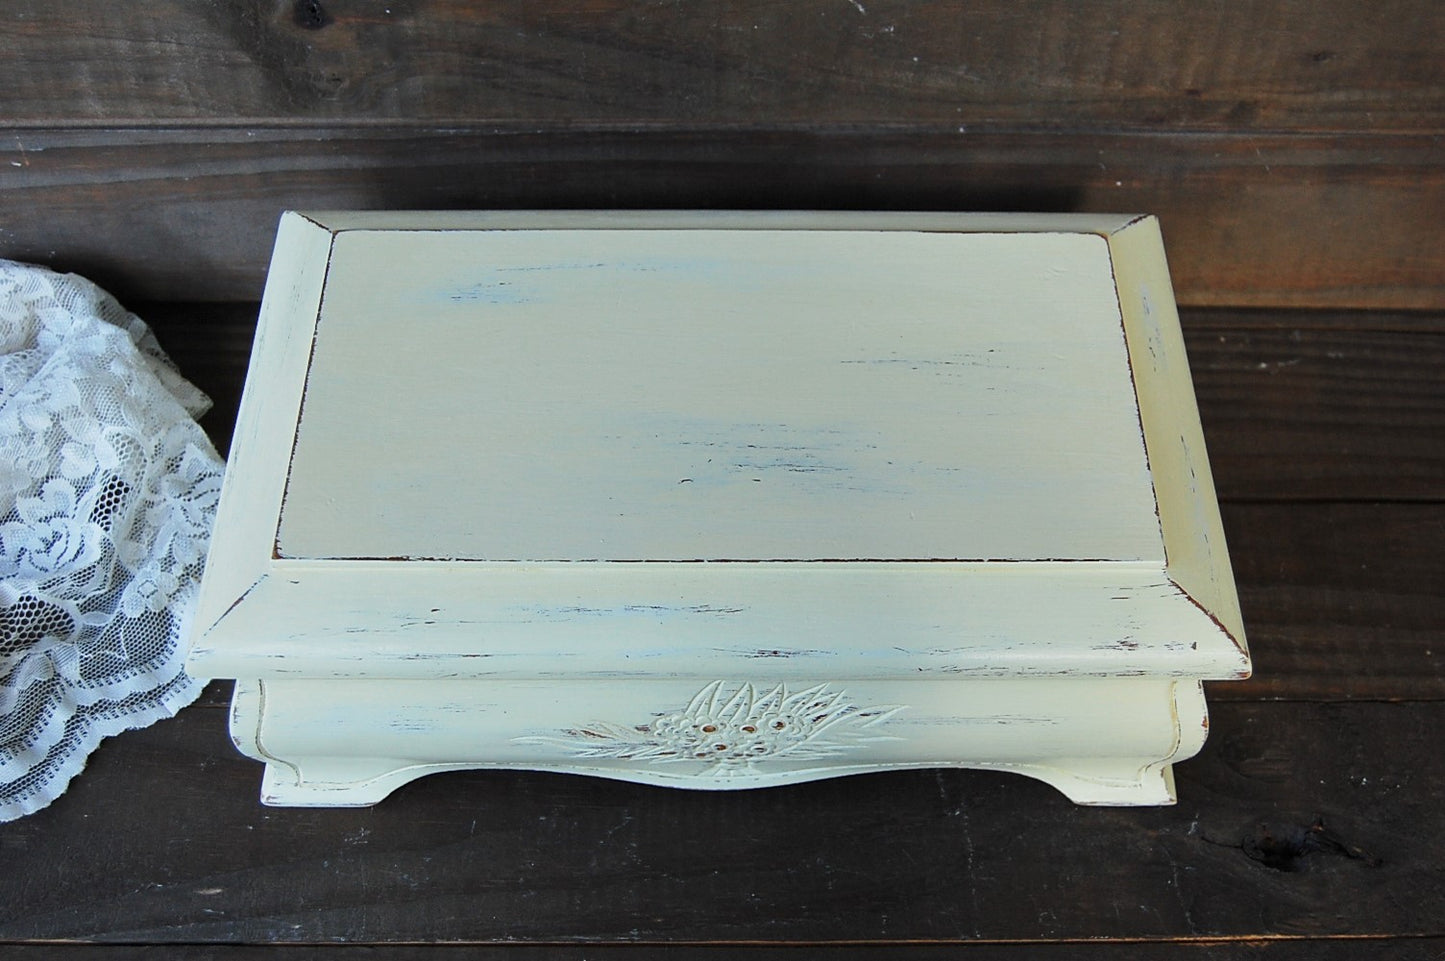 Cherry jewelry chest - The Vintage Artistry